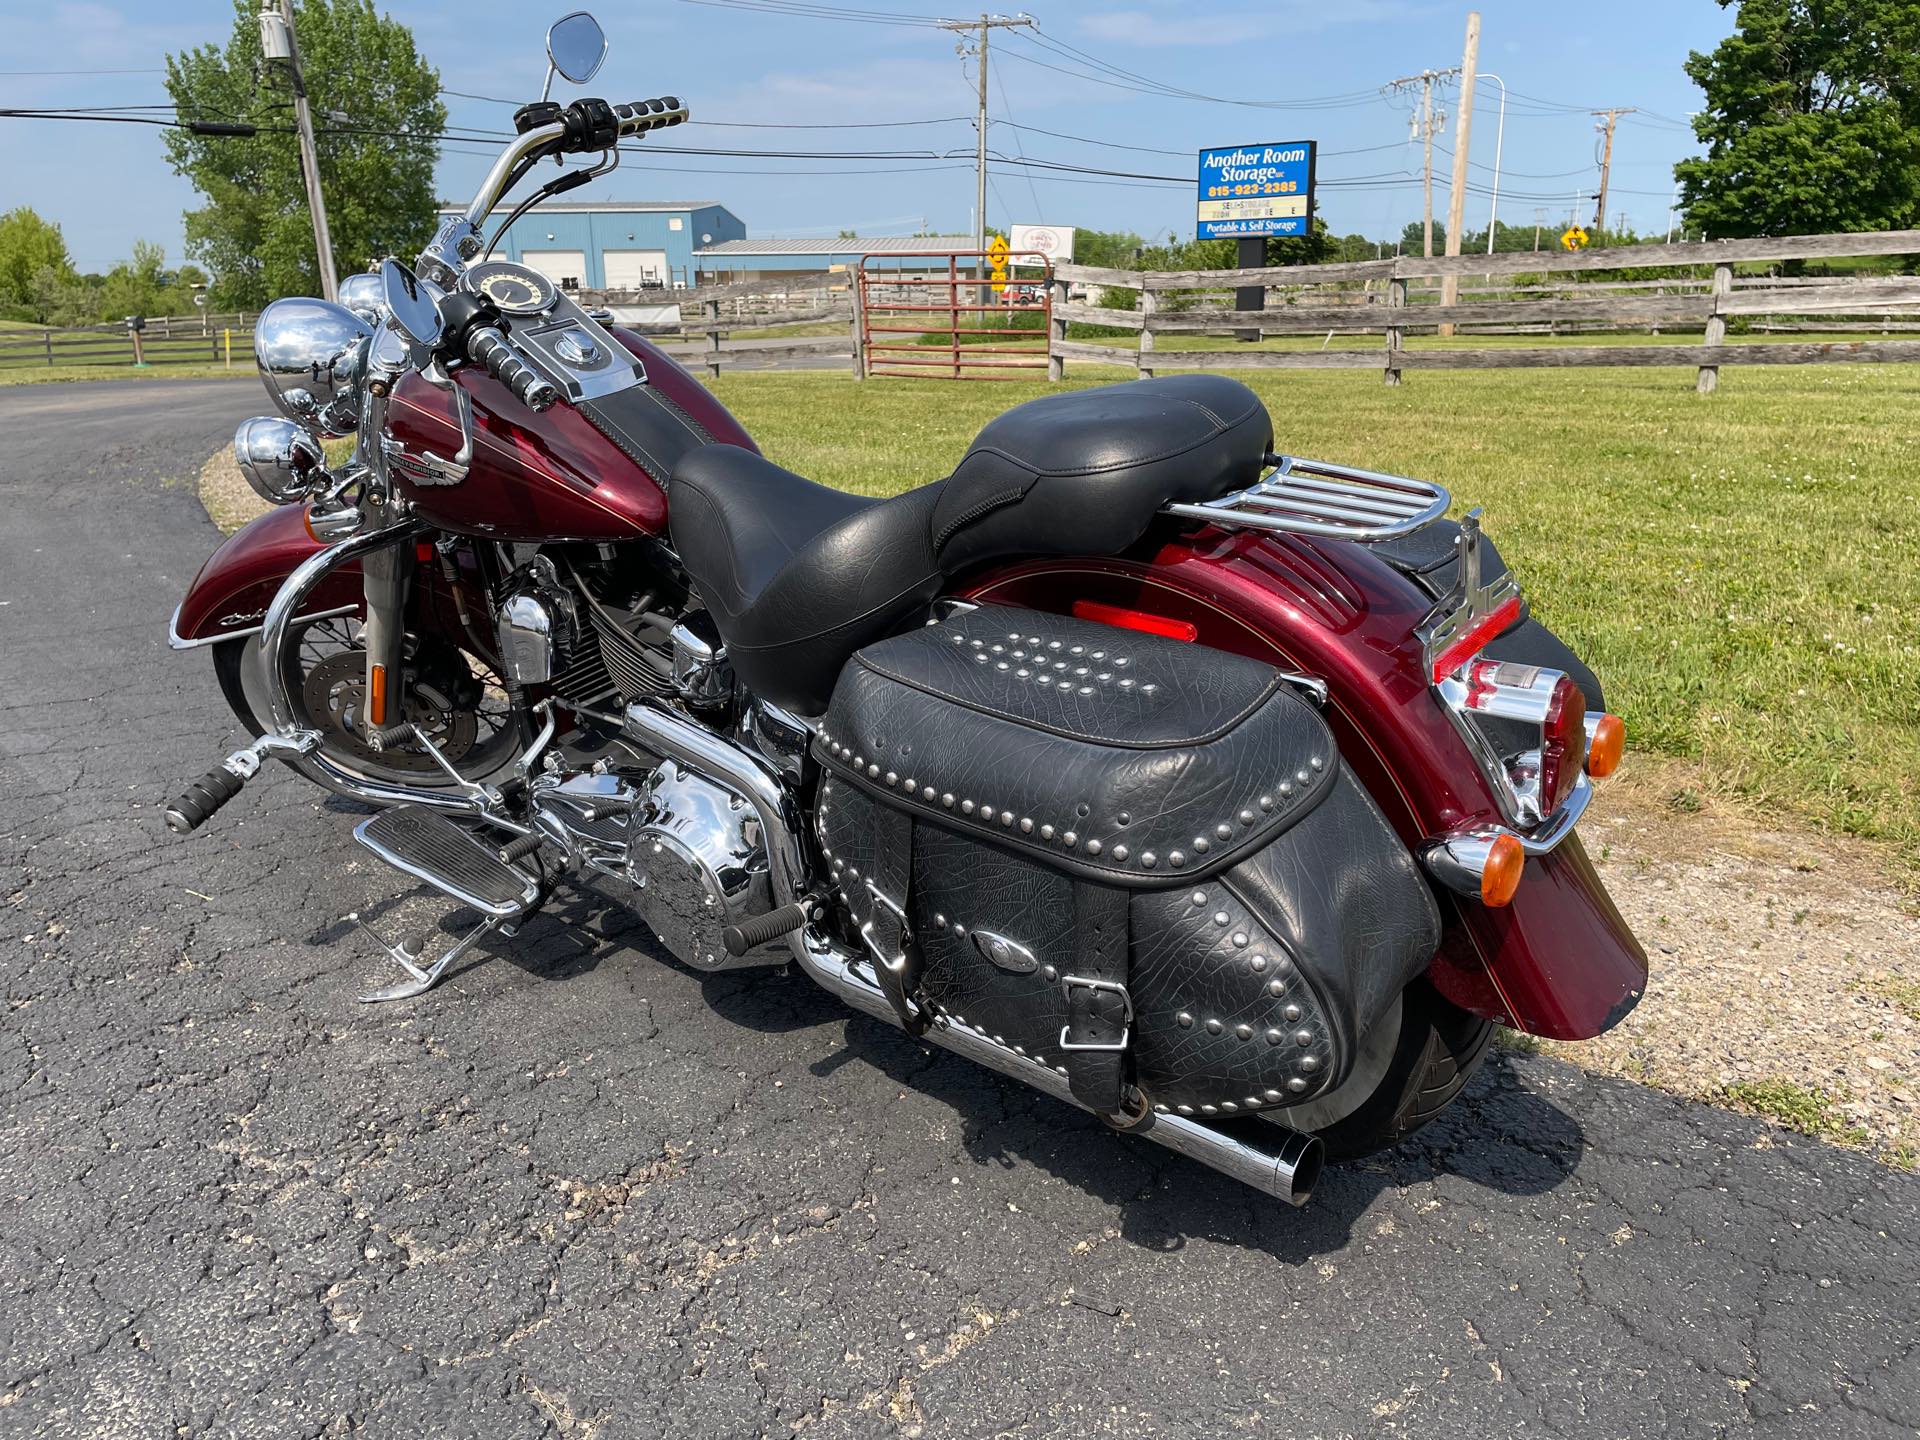 2008 Harley-Davidson Softail Deluxe at Randy's Cycle